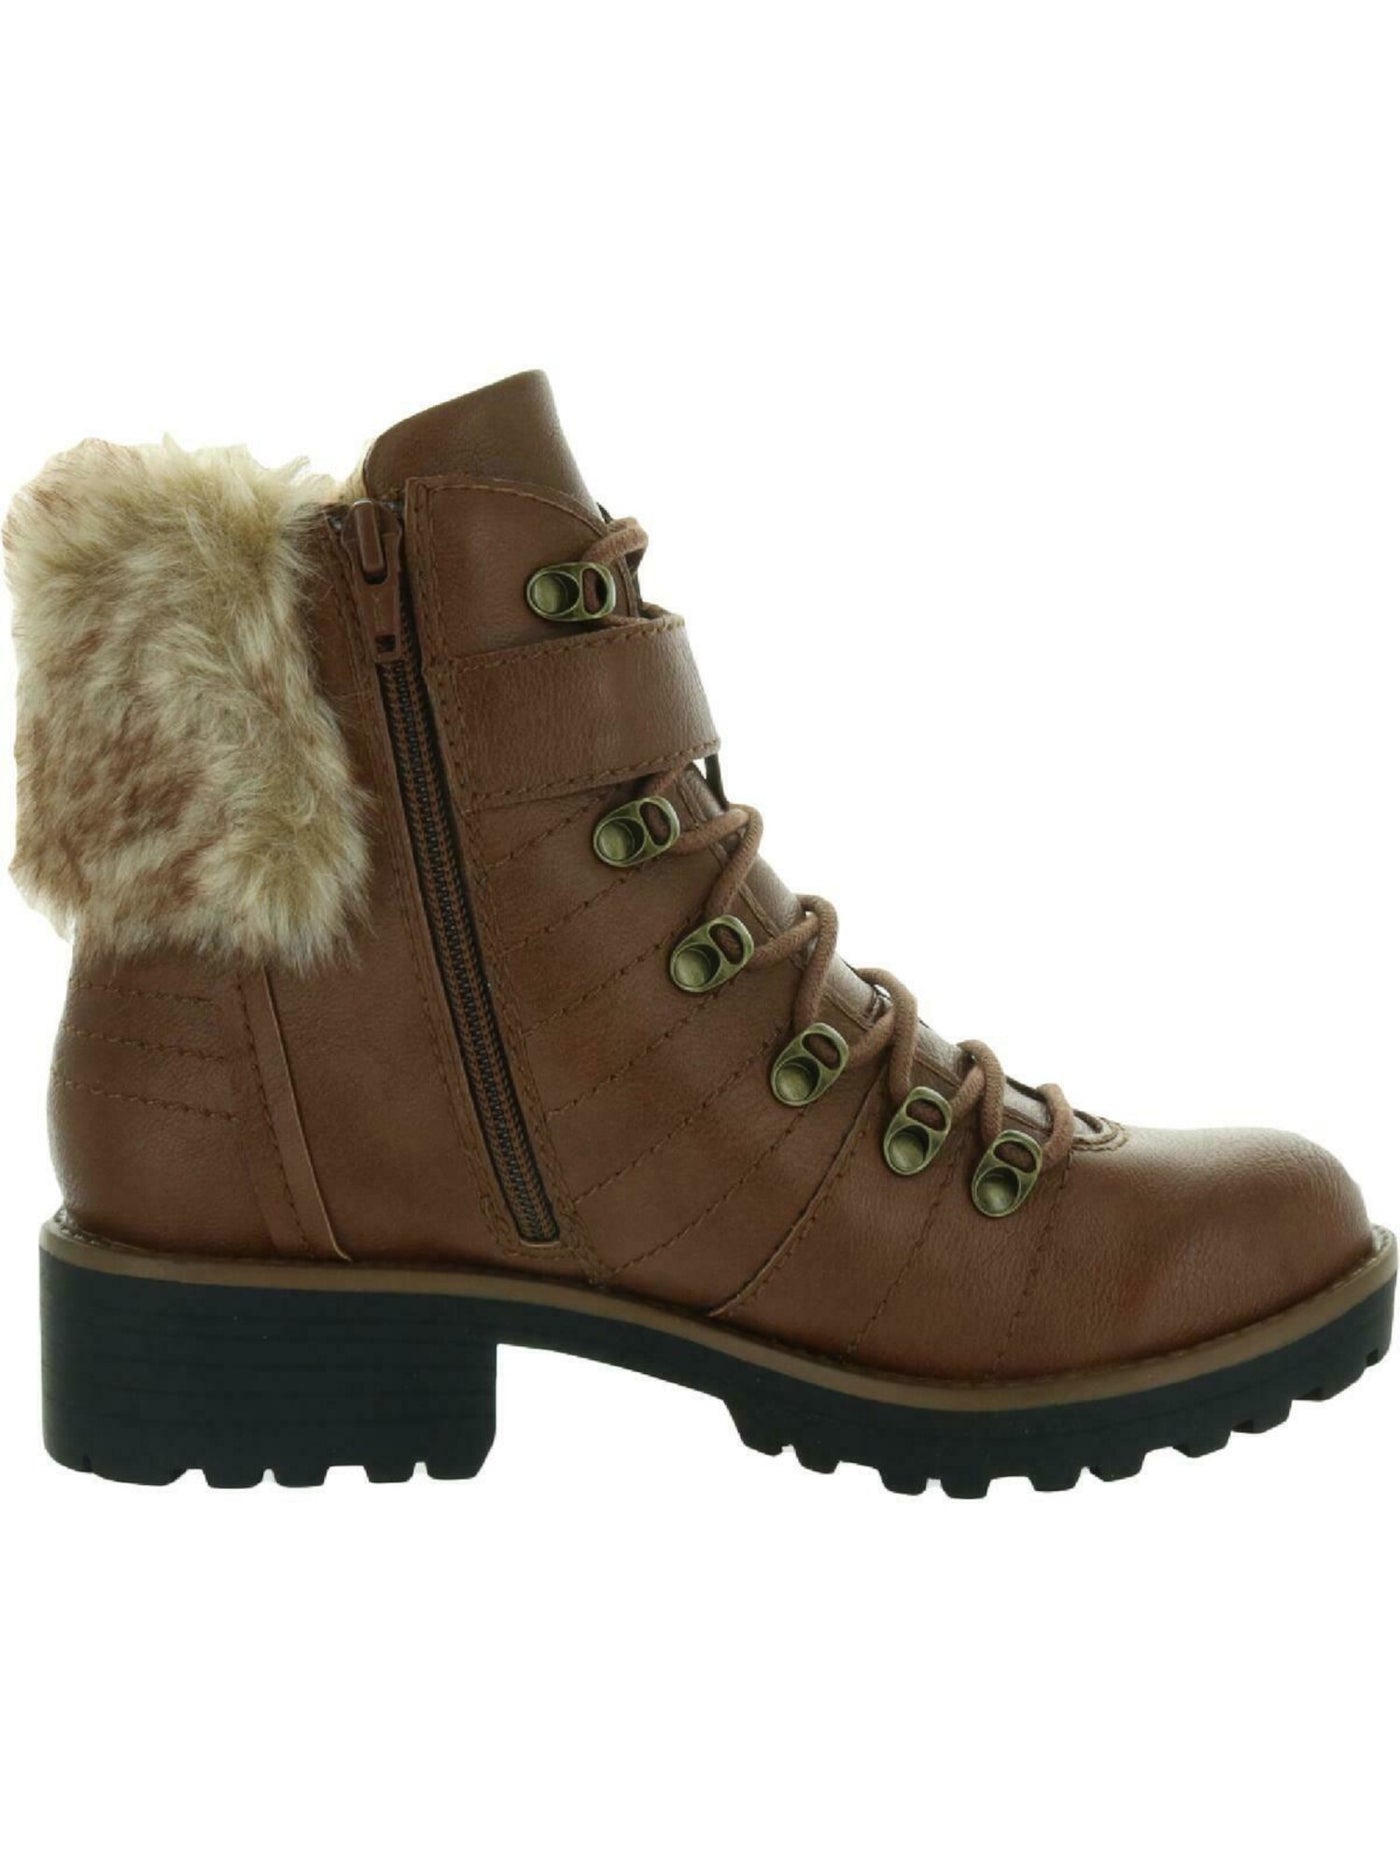 SUN STONE Womens Brown Ankle Strap Buckle Detail Remova Cushioned Jojo Round Toe Block Heel Lace-Up Snow Boots 6